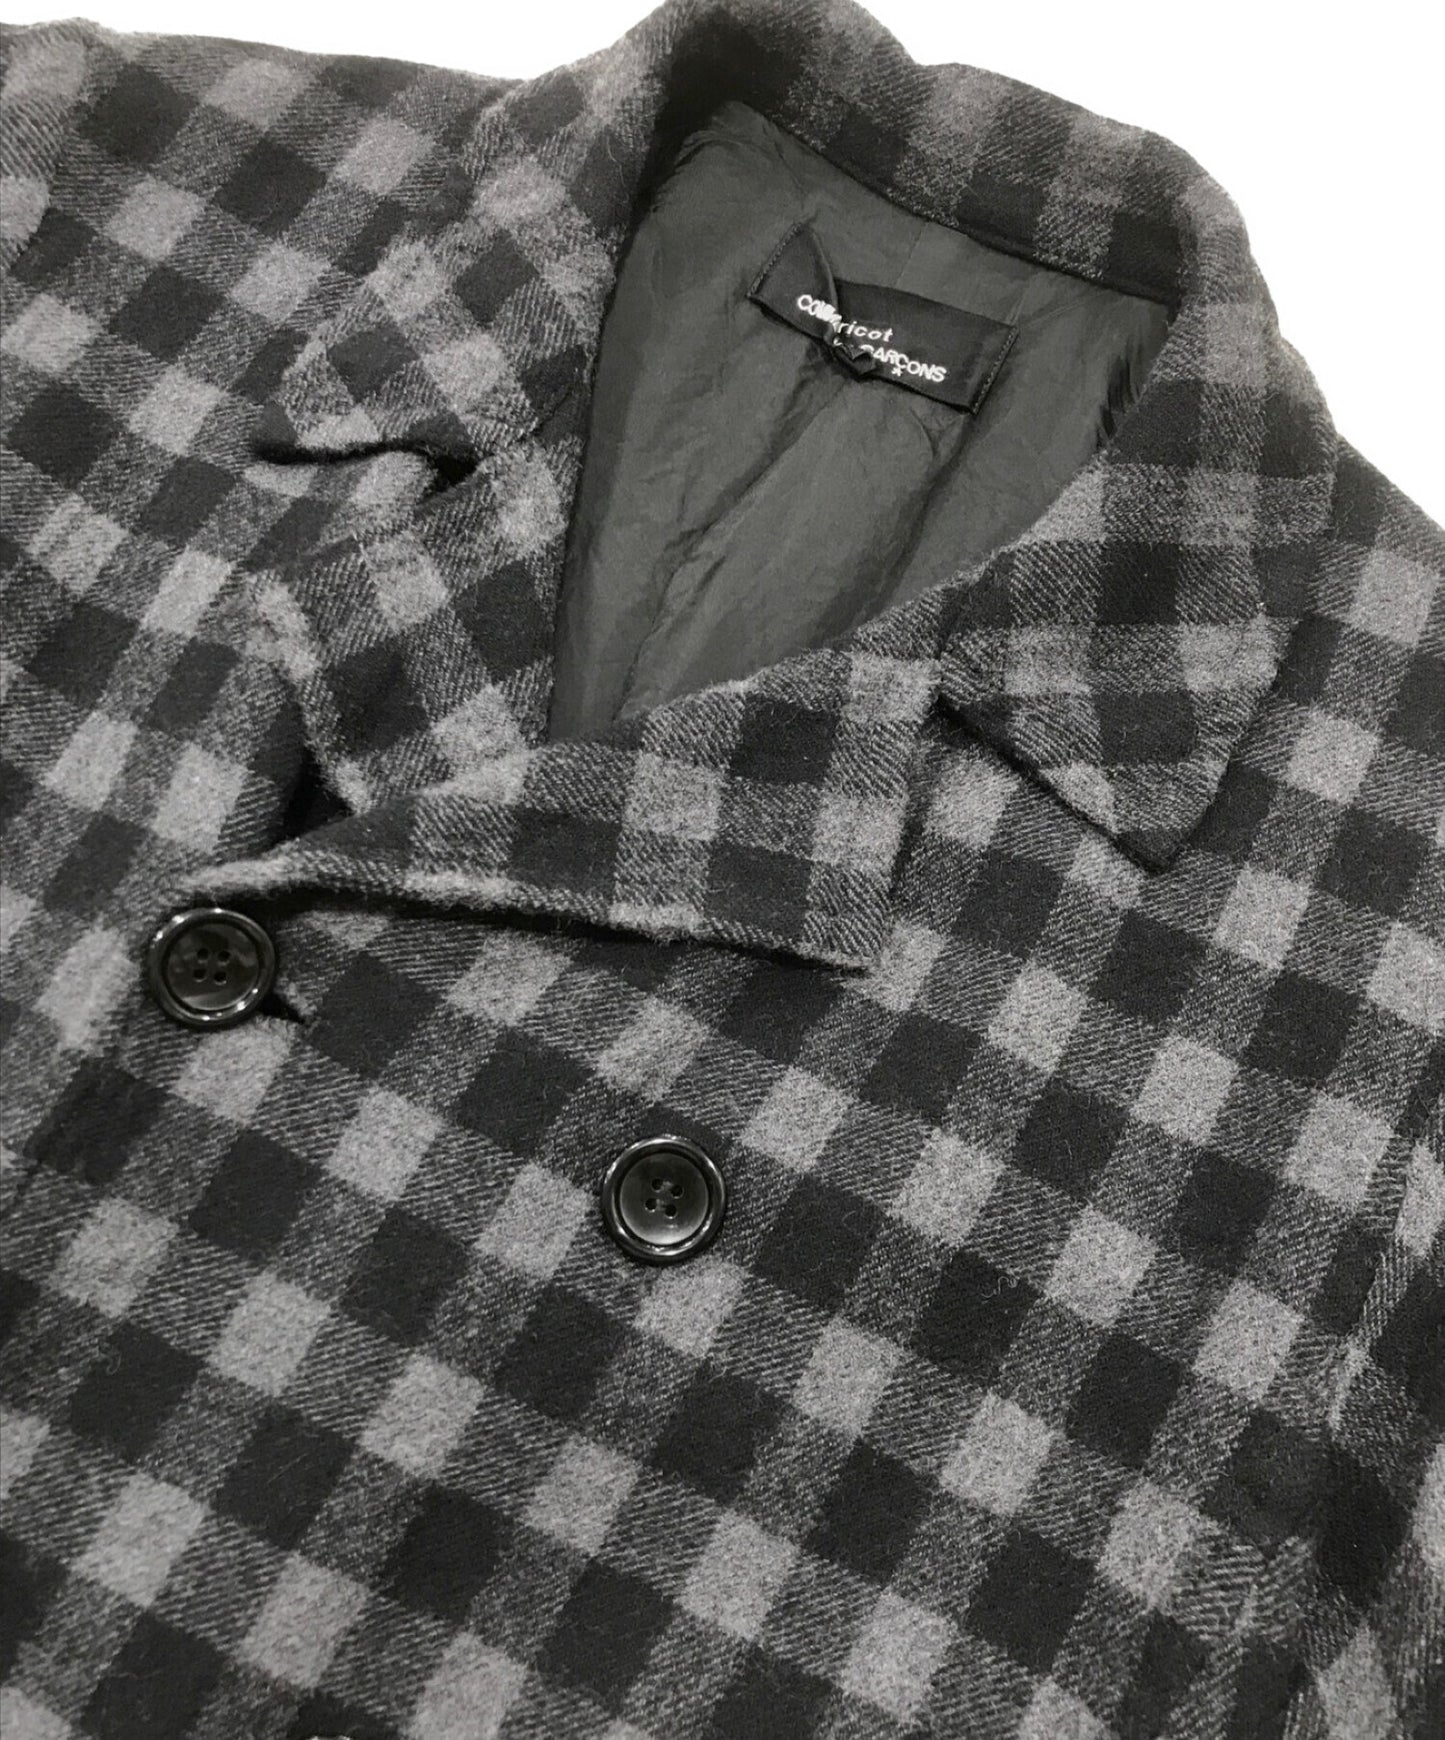 Comme des Garcons Tricot Checked Wool Double Coat